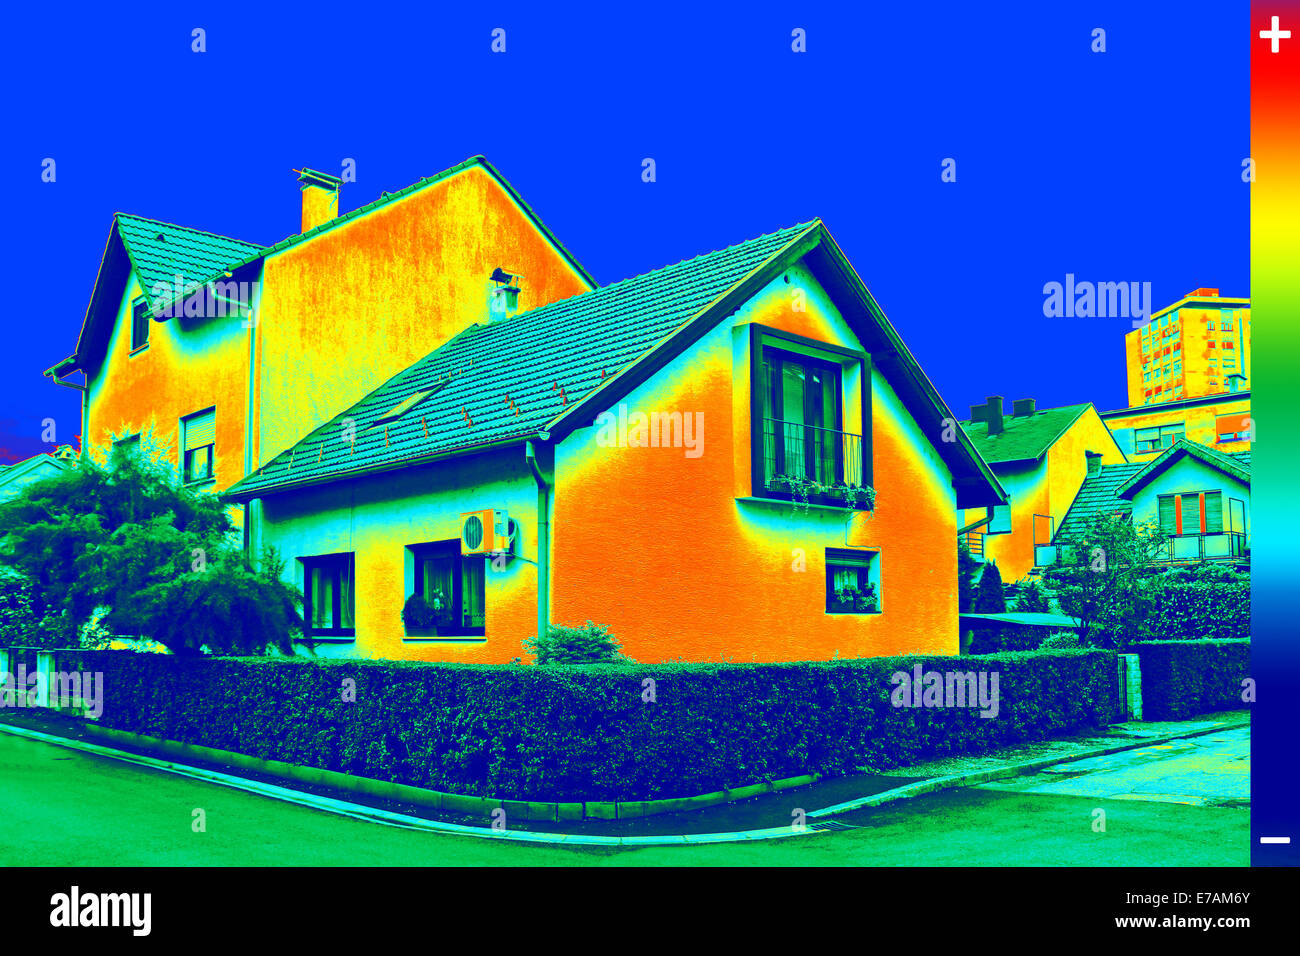 https://c8.alamy.com/comp/E7AM6Y/infrared-thermovision-image-showing-lack-of-thermal-insulation-on-E7AM6Y.jpg